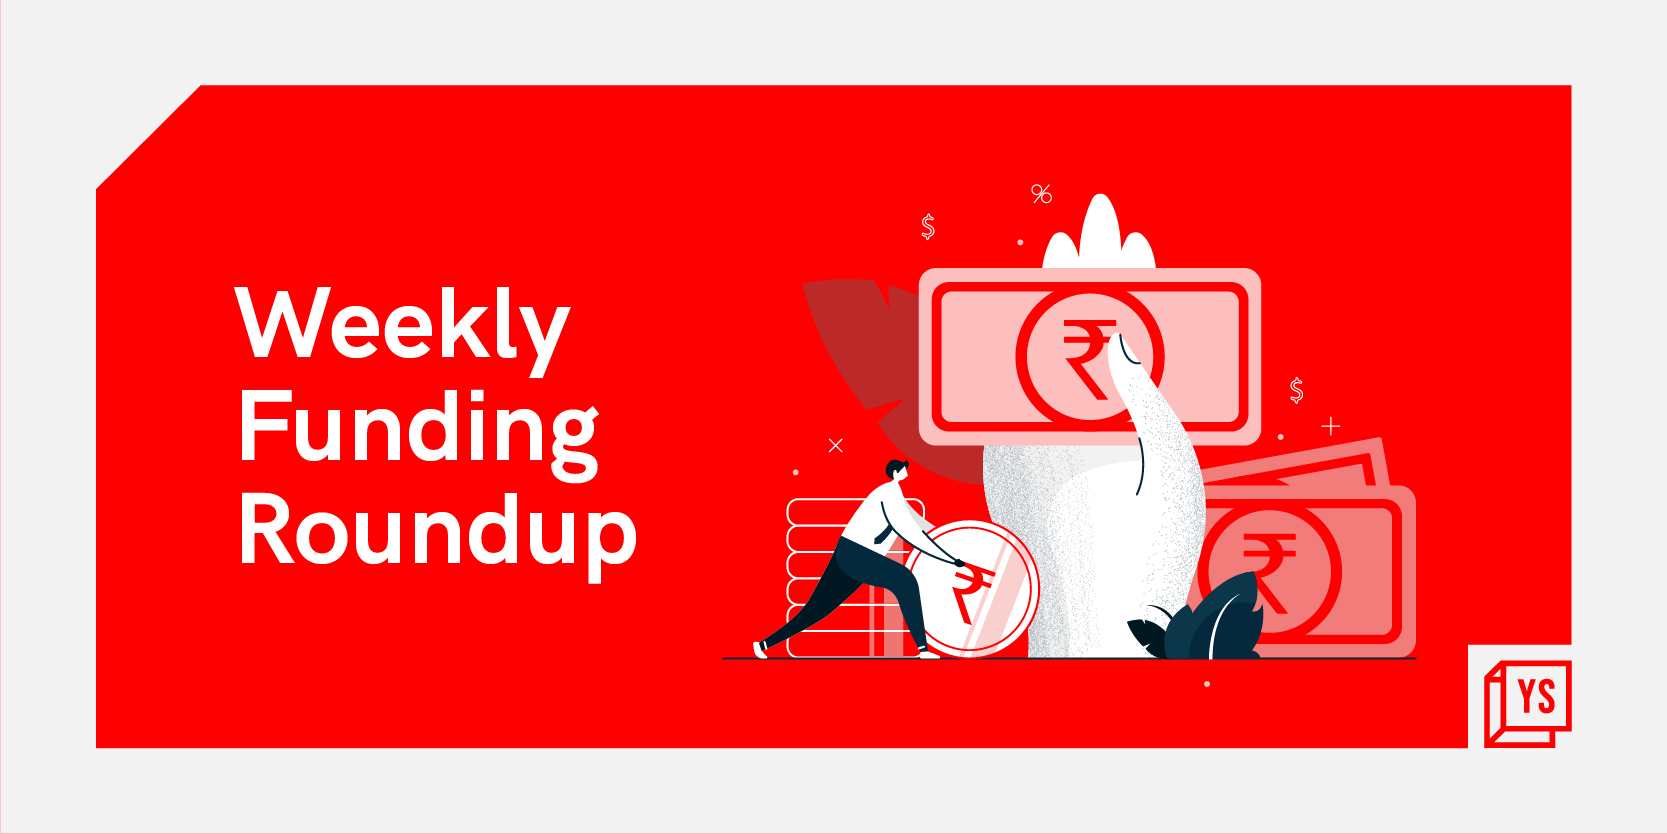 [Weekly funding roundup Aug 29-Sept 2] Venture capital inflow into Indian startups remains subdued